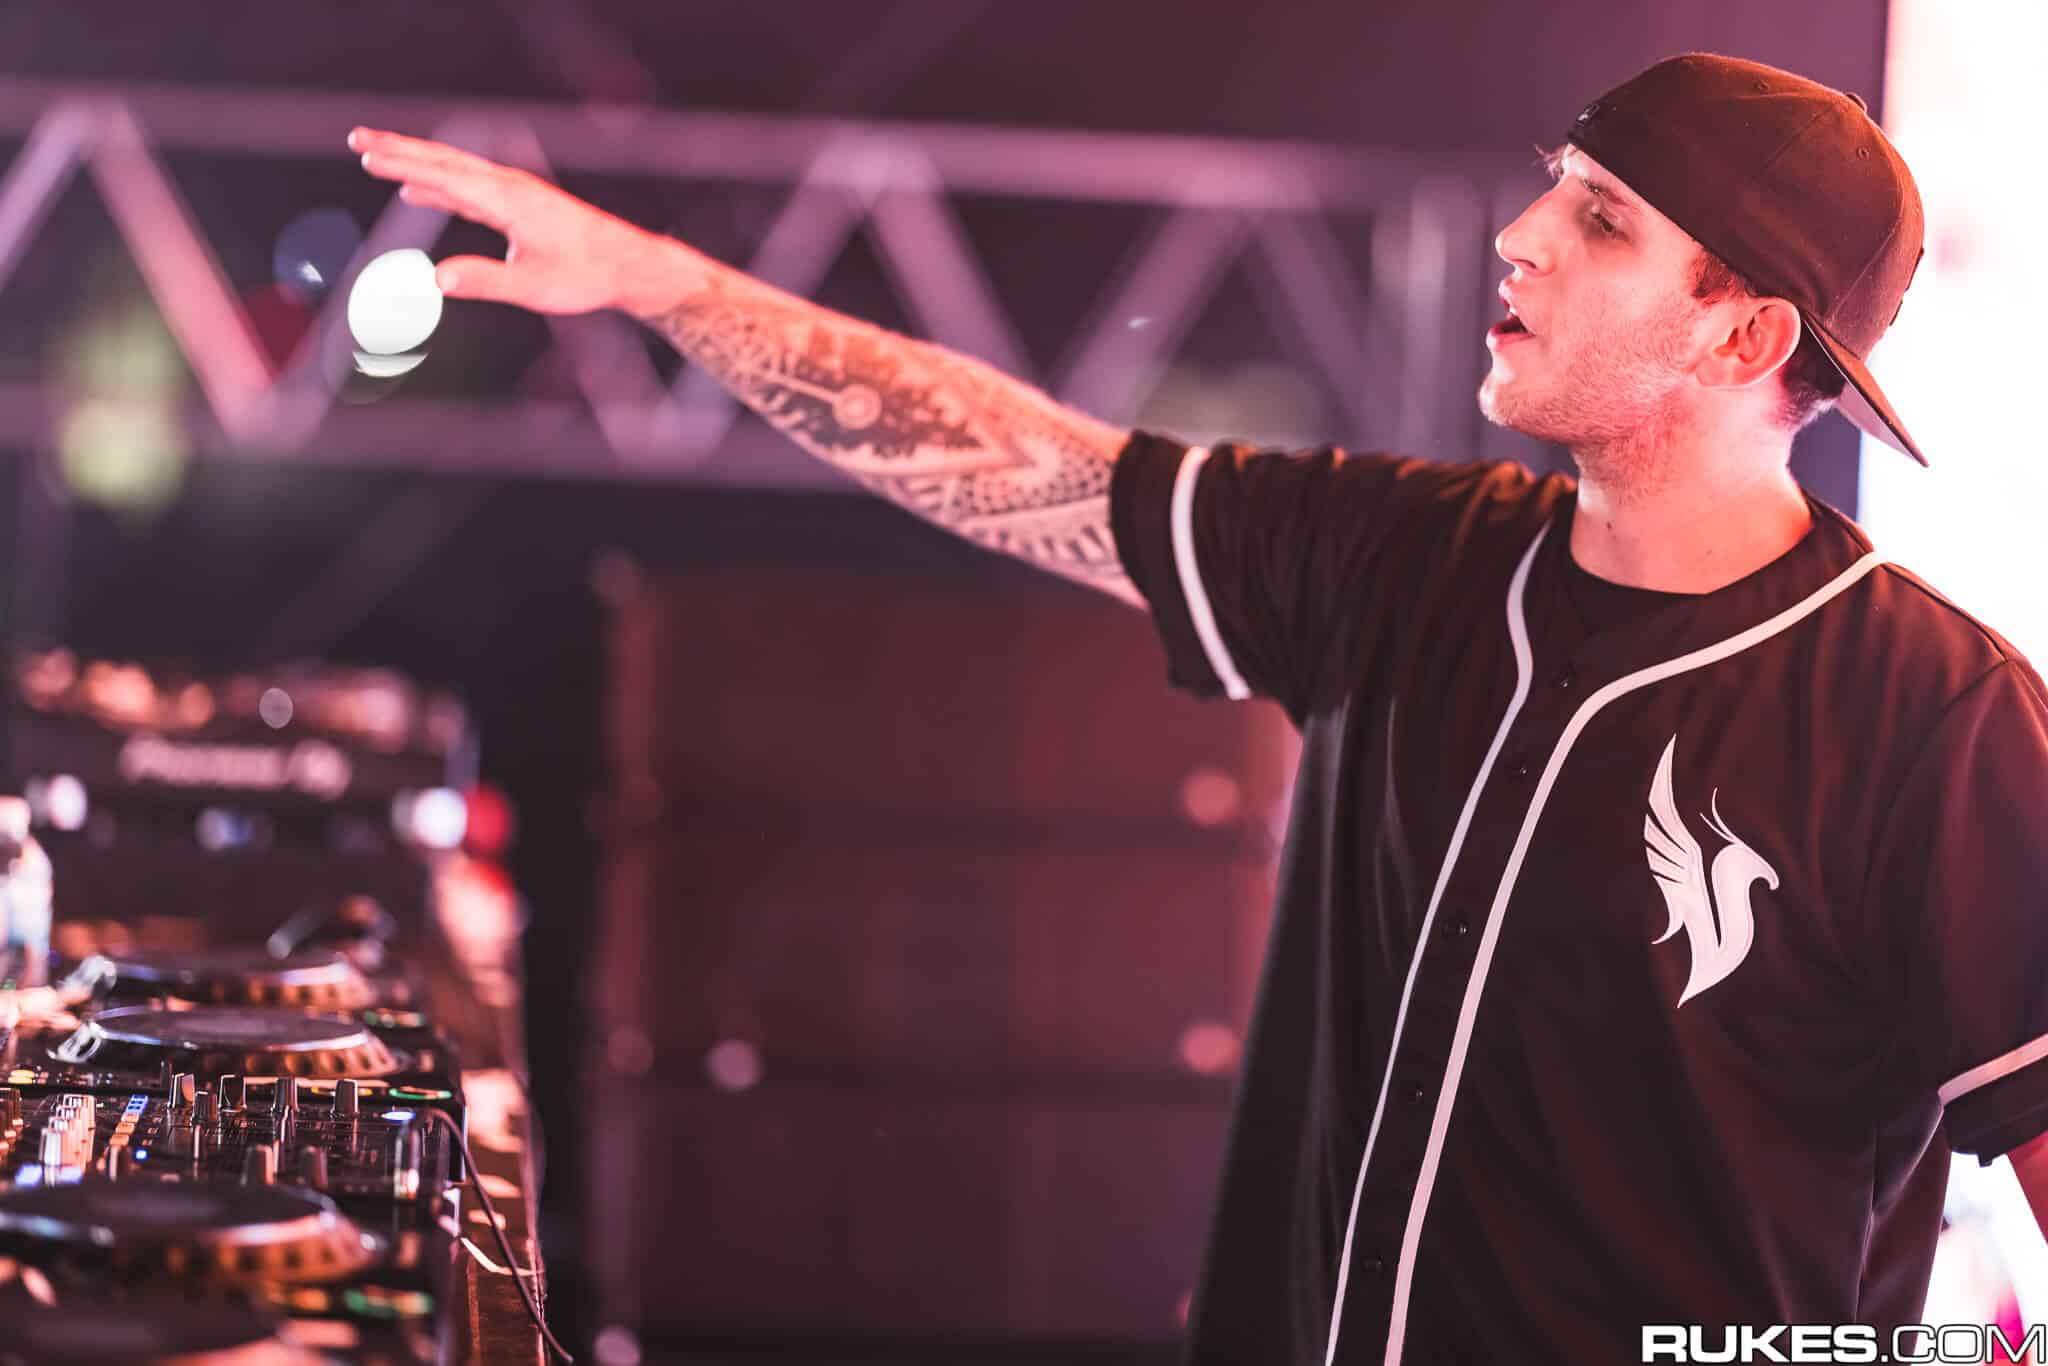 ILLENIUM & Skylar Grey release long-awaited collab “From the Ashes”: Listen